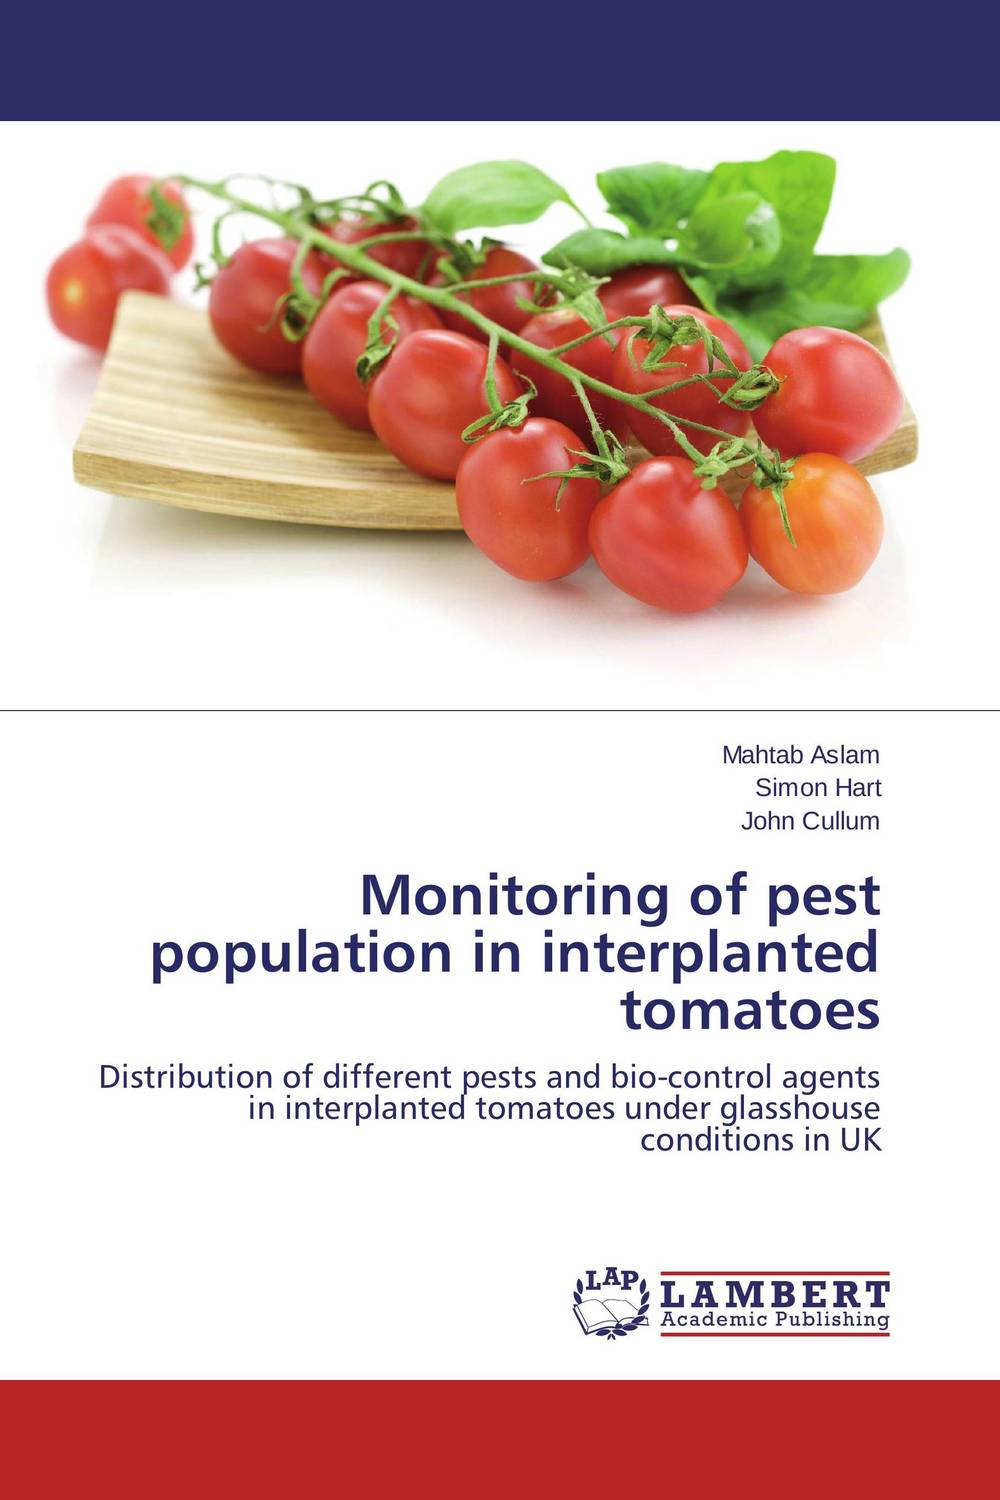 Monitoring of pest population in interplanted tomatoes